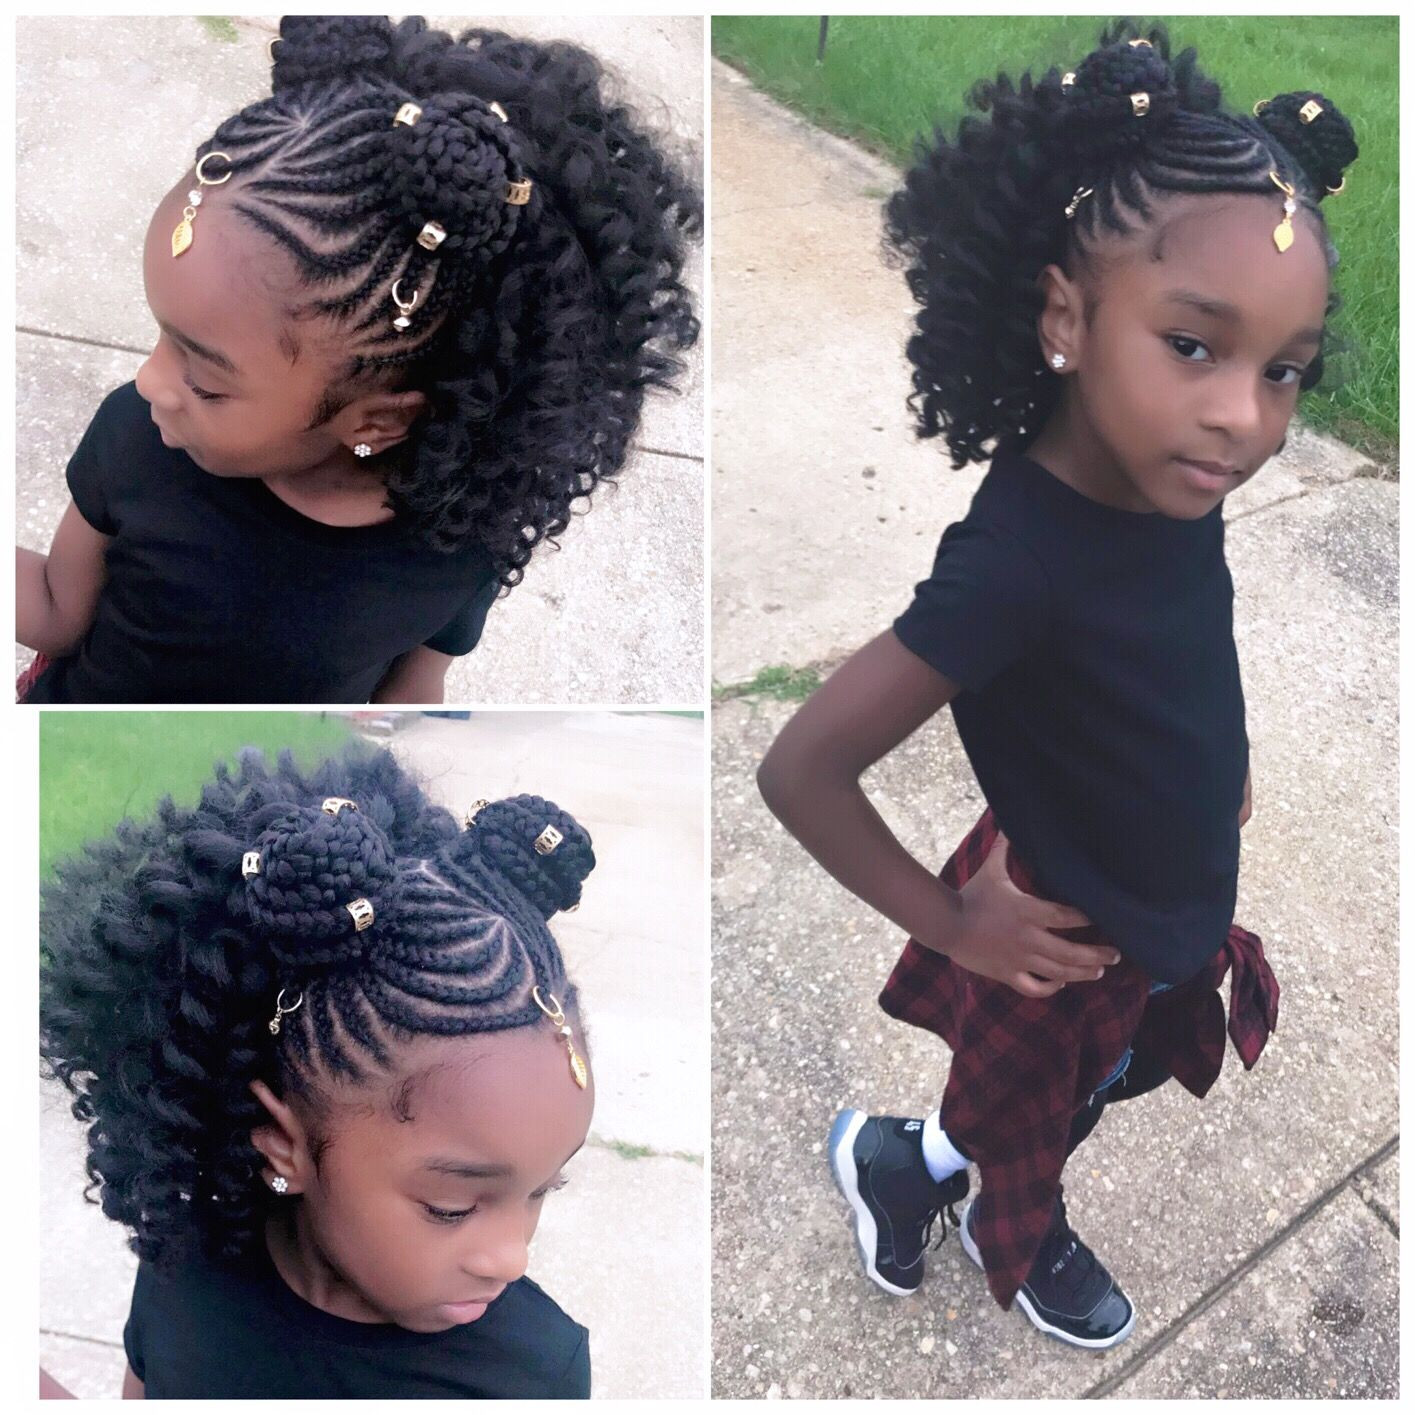 Cute Hairstyles For Black Toddlers
 So cute Kids hairstyles